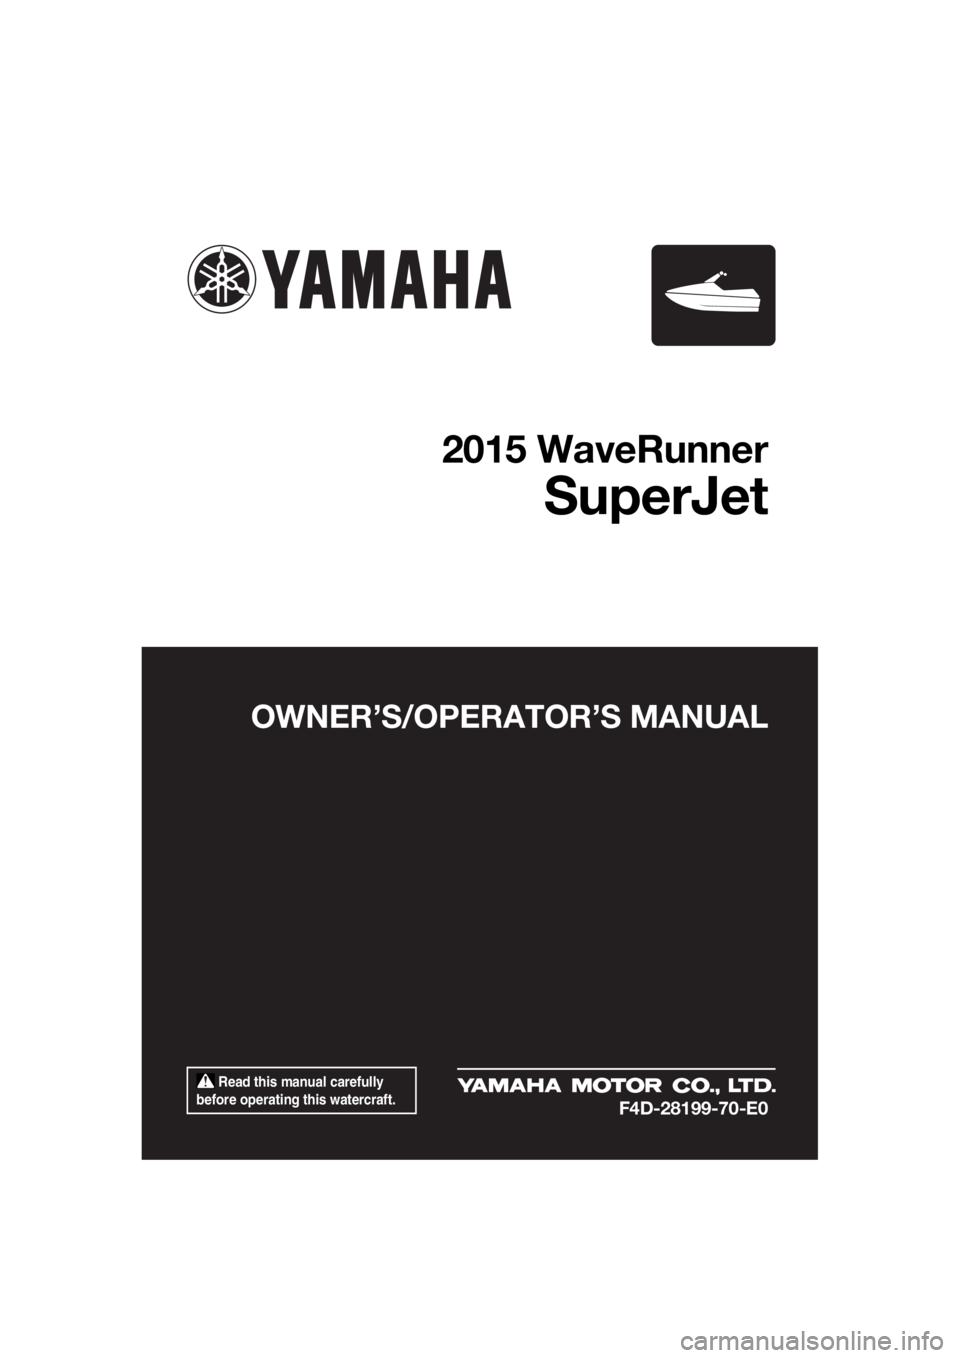 YAMAHA SUPERJET 2015  Owners Manual  Read this manual carefully 
before operating this watercraft.
OWNER’S/OPERAT OR’S MANUAL
2015 WaveRunner
SuperJet
F4D-28199-70-E0
UF4D70E0.book  Page 1  Wednesday, May 7, 2014  10:53 AM 